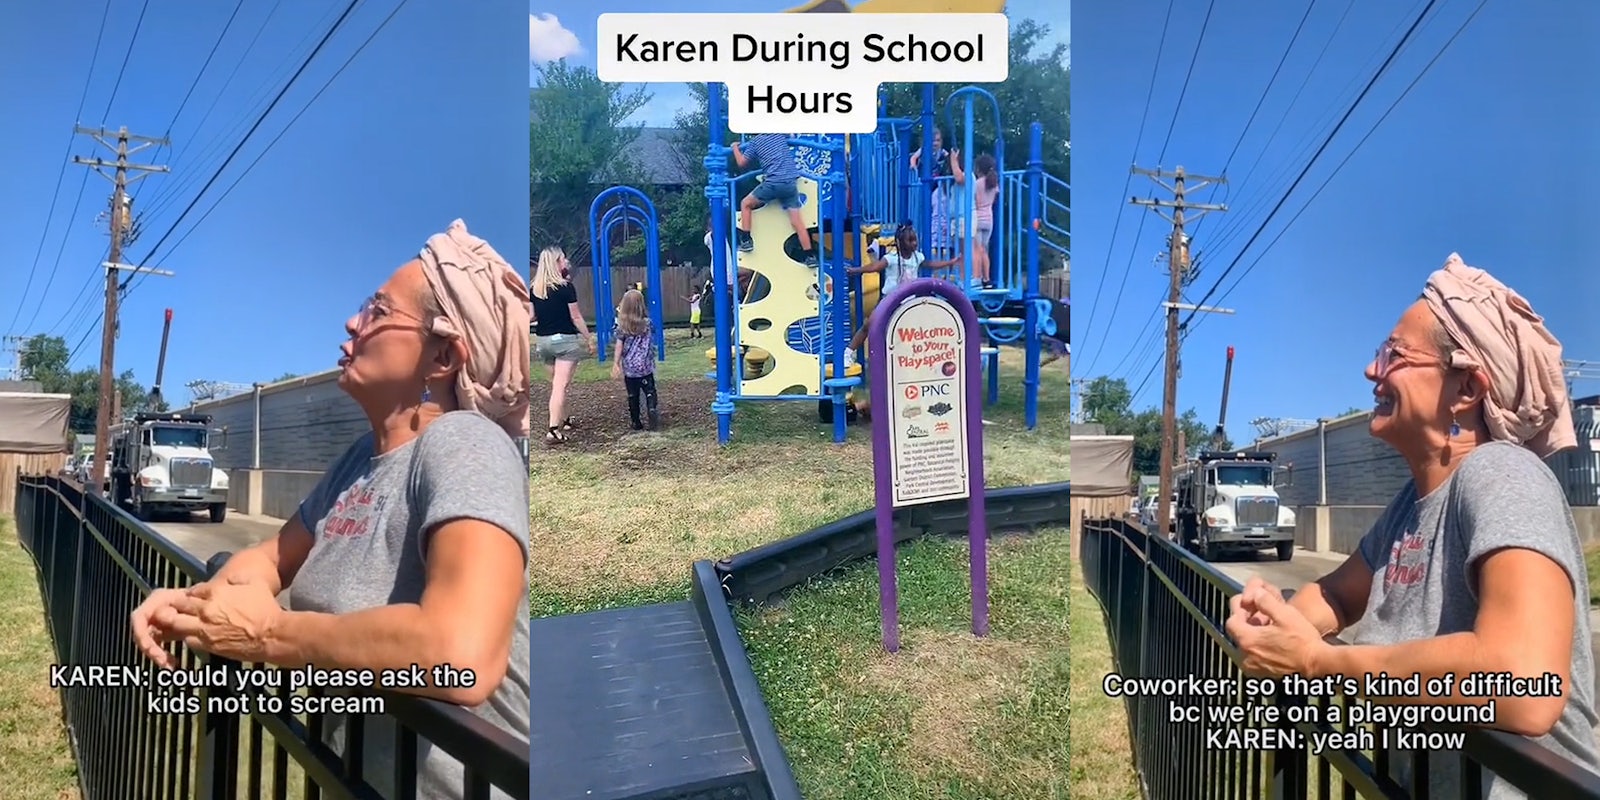 'Karen' on park fence speaking caption 'KAREN: could you please ask the kids not to scream' (l) park with children playing caption 'Karen During School Hours' (c) 'Karen' leaning on park fence speaking caption 'Coworker: so that's kind of difficult bc we're on a playground KAREN: yeah I know' (r)